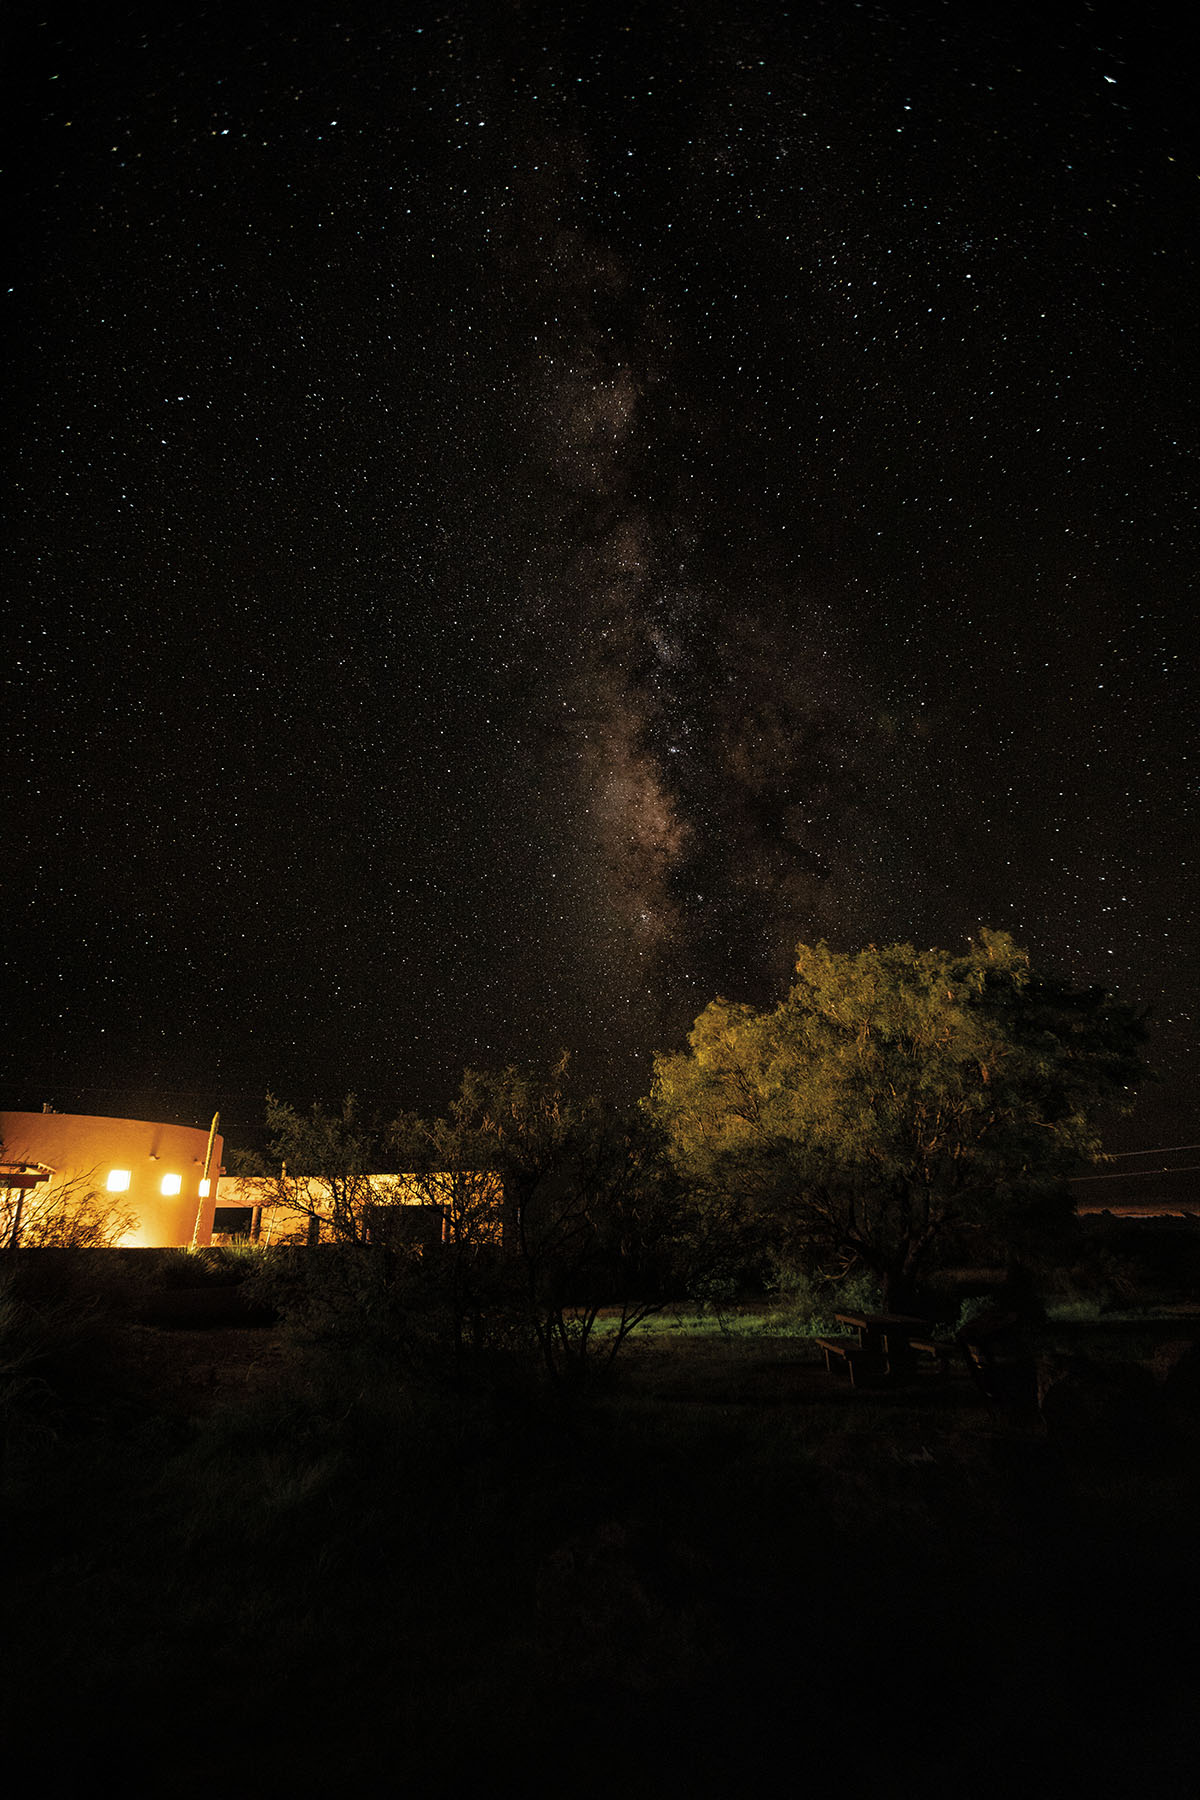 A lighted visitor center is the only thing illuminiated in this night sky photo of the stars over Marfa